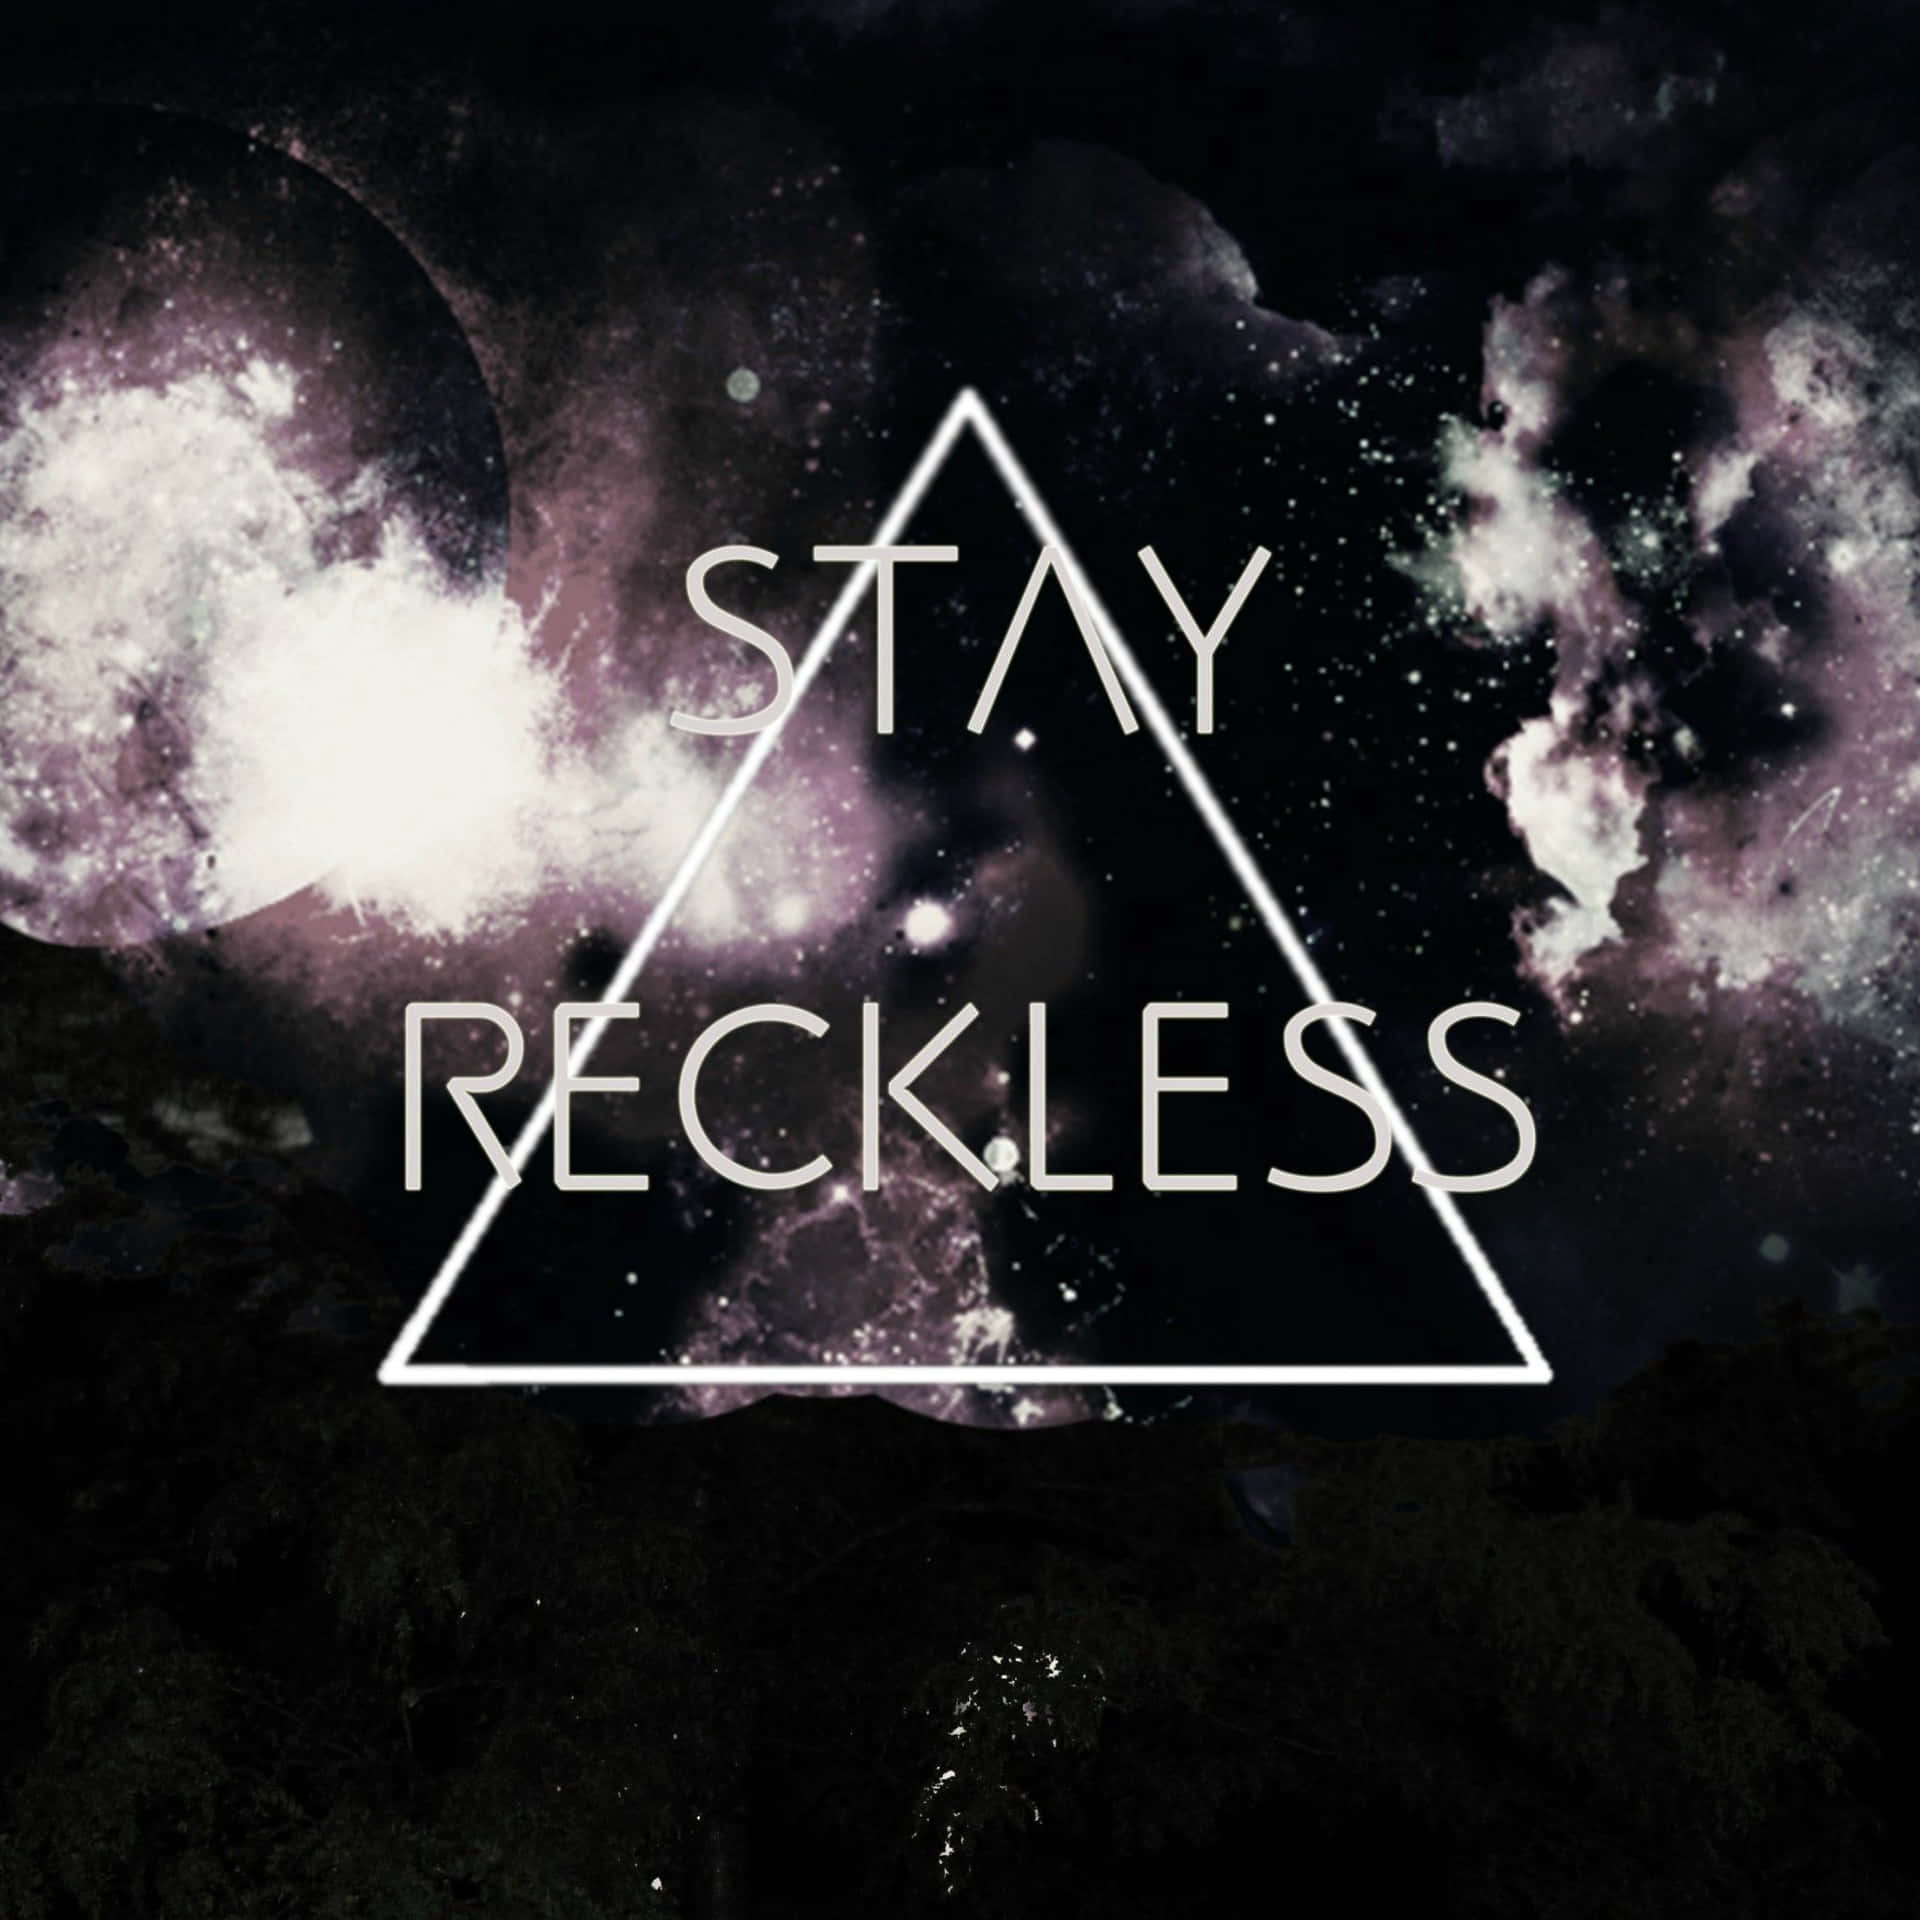 Stay Reckless Wallpaper